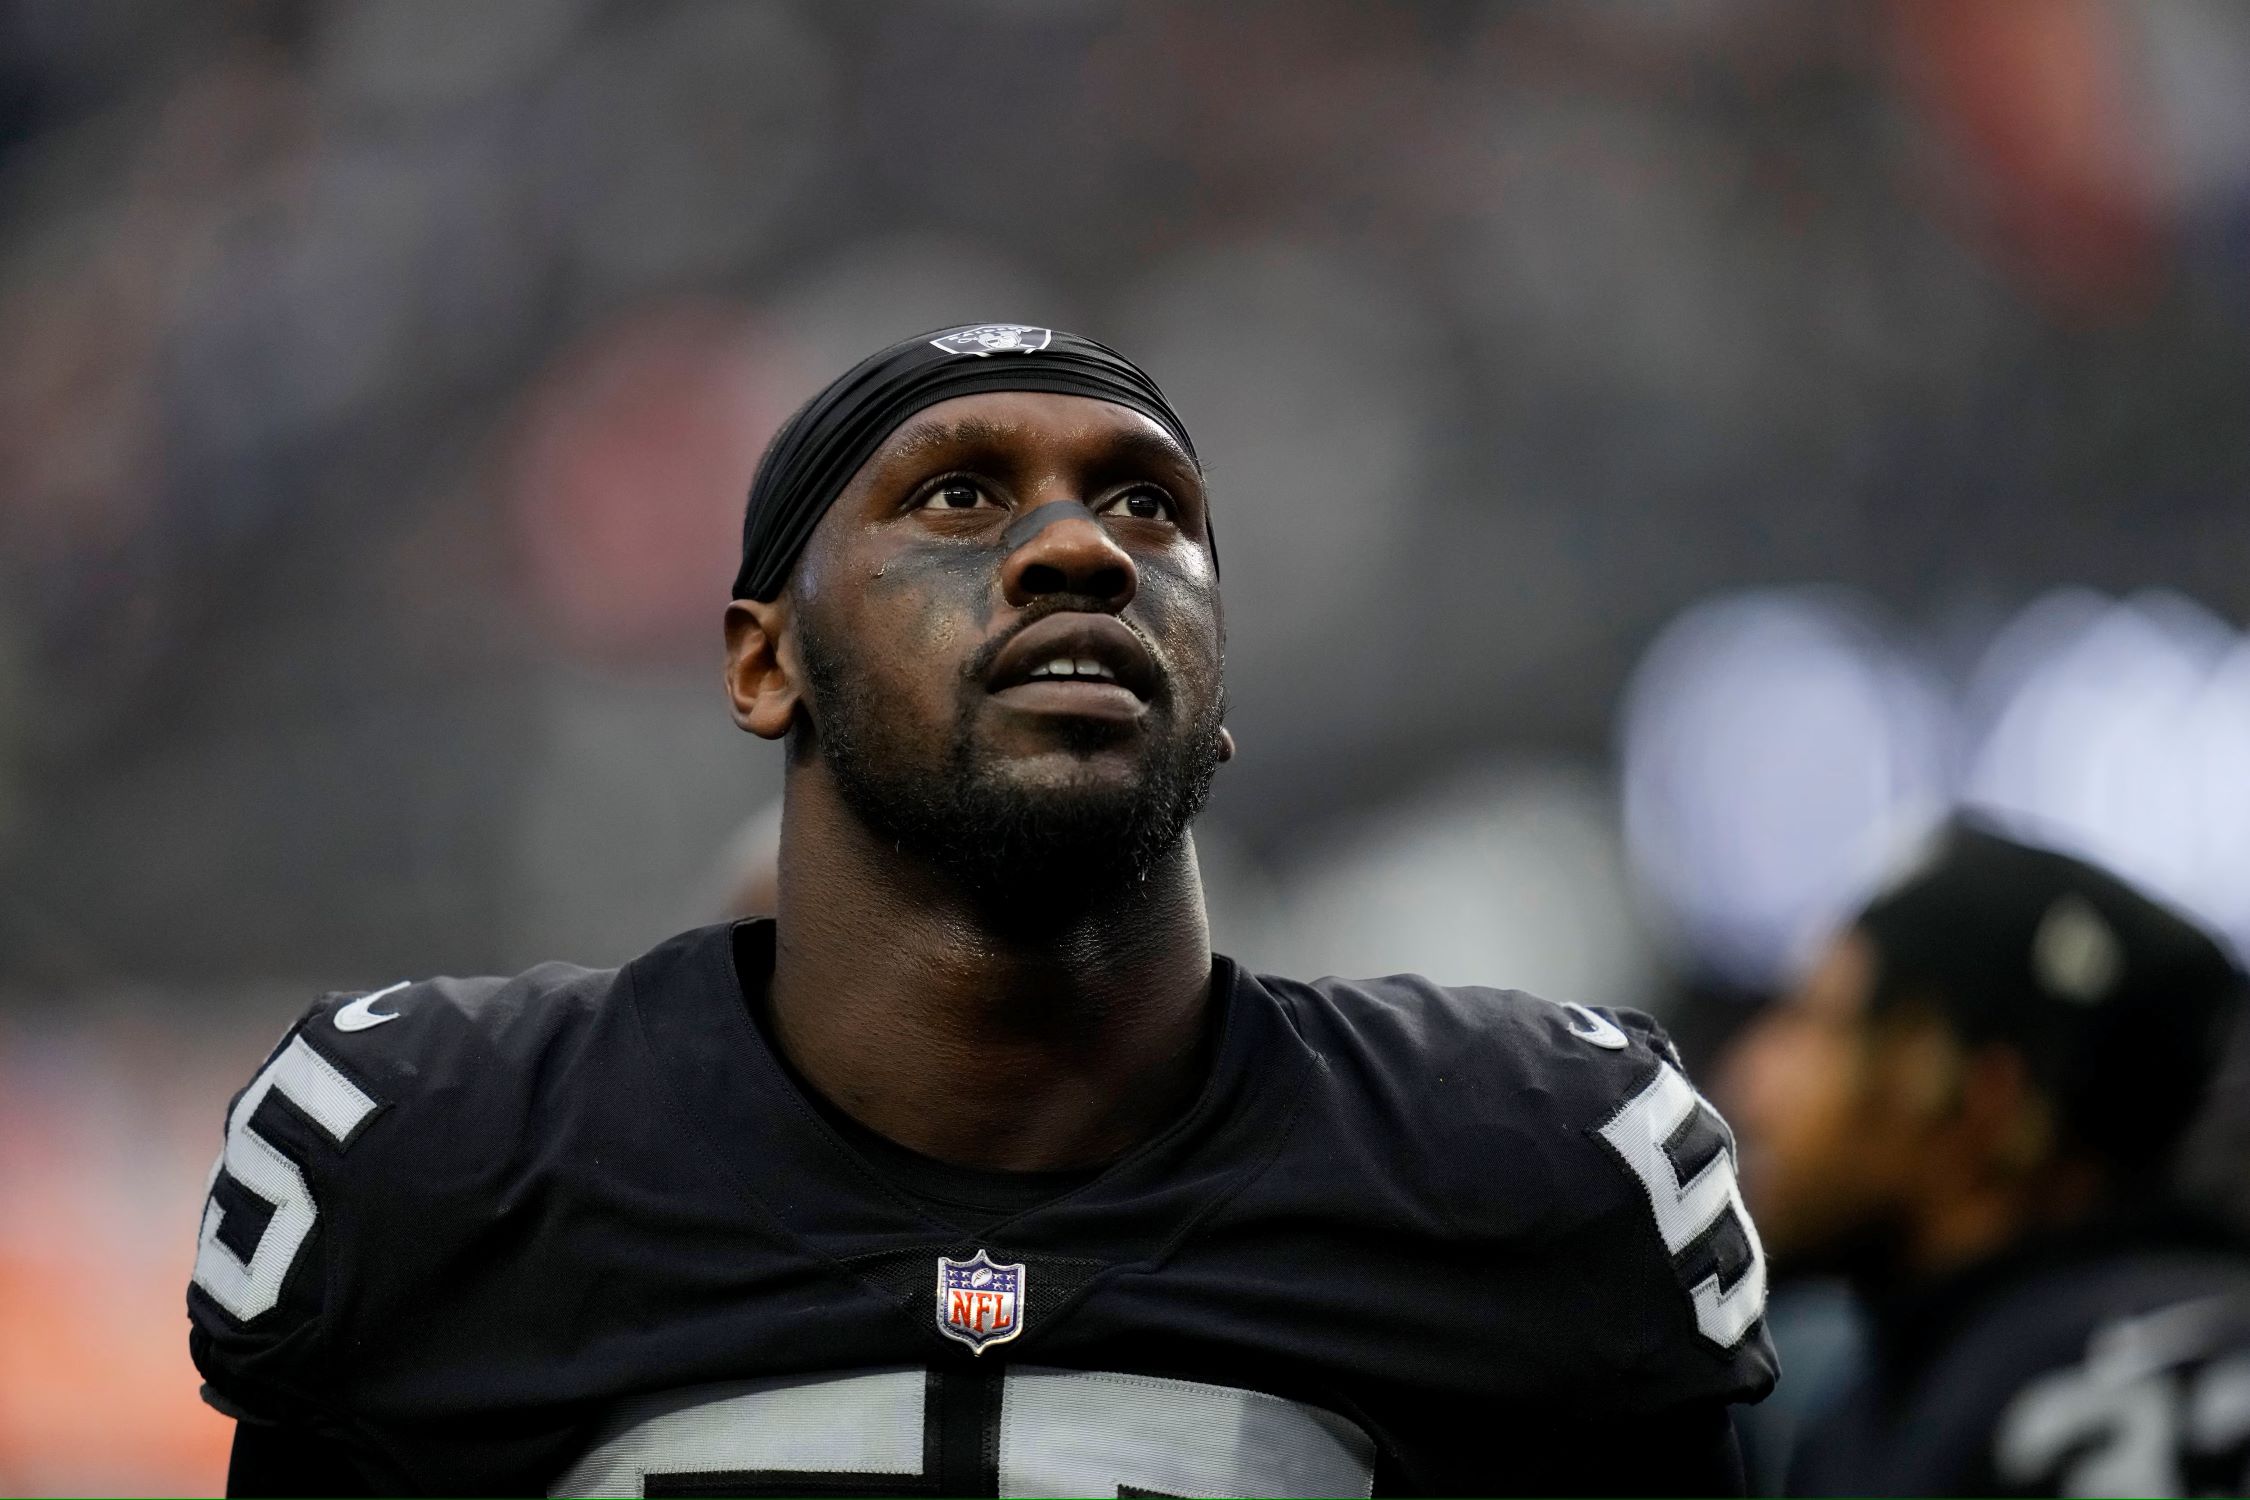 chandler-jones-claims-he-was-forced-into-mental-health-hospital-alleges-injections